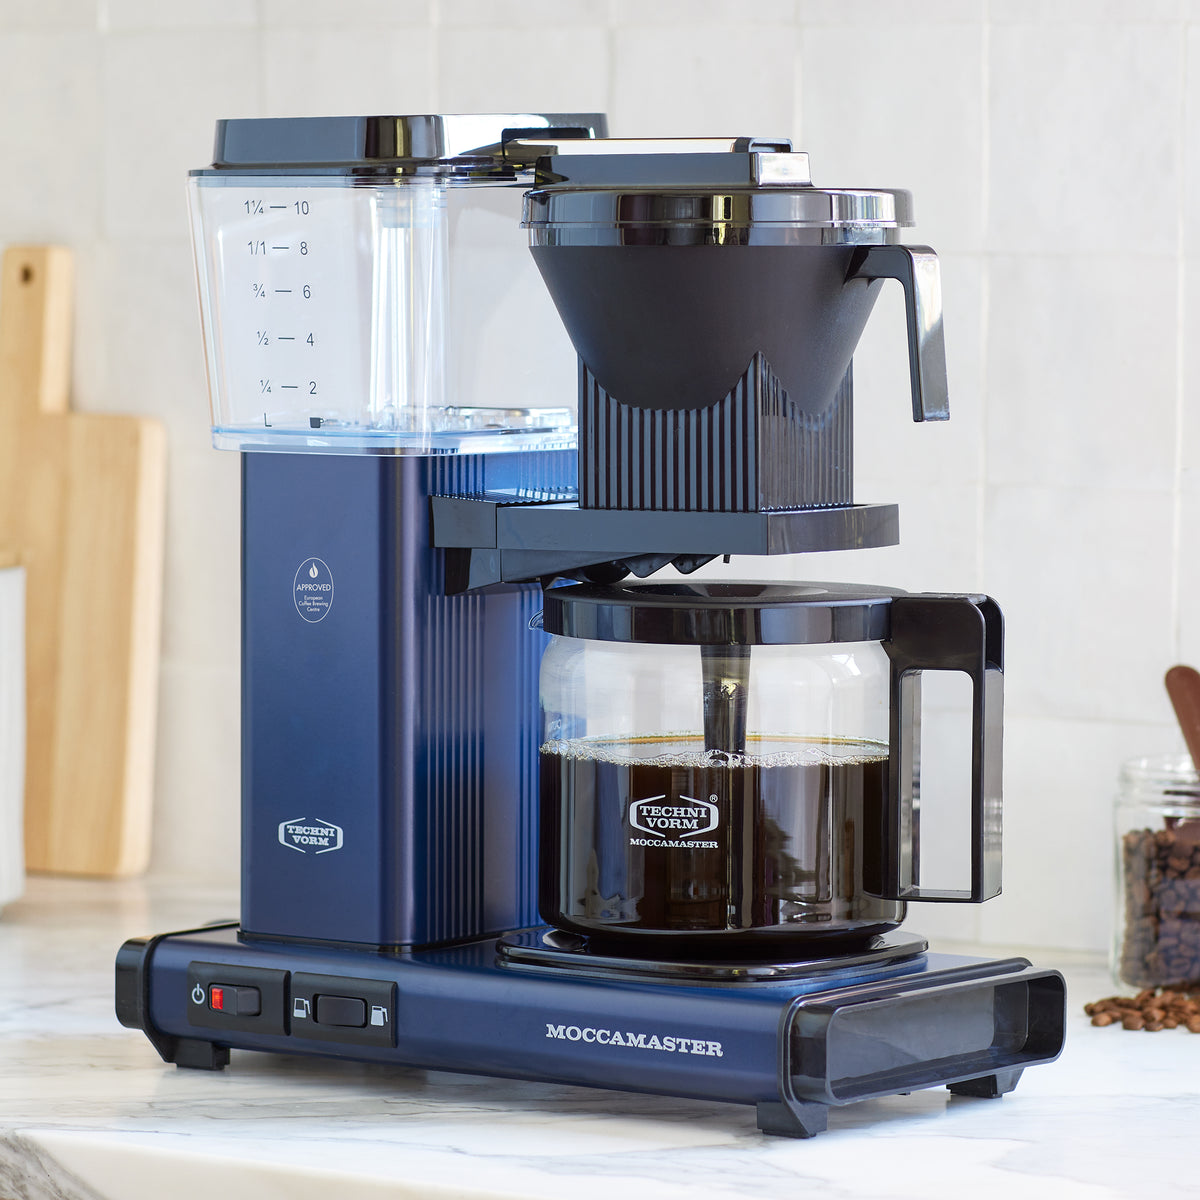 Moccamaster KBGV Select in Midnight Blue, on a marble counter with white tile backsplash. A jar of coffee beans with a scoop on the right, a wooden cutting board on the left, in the background.